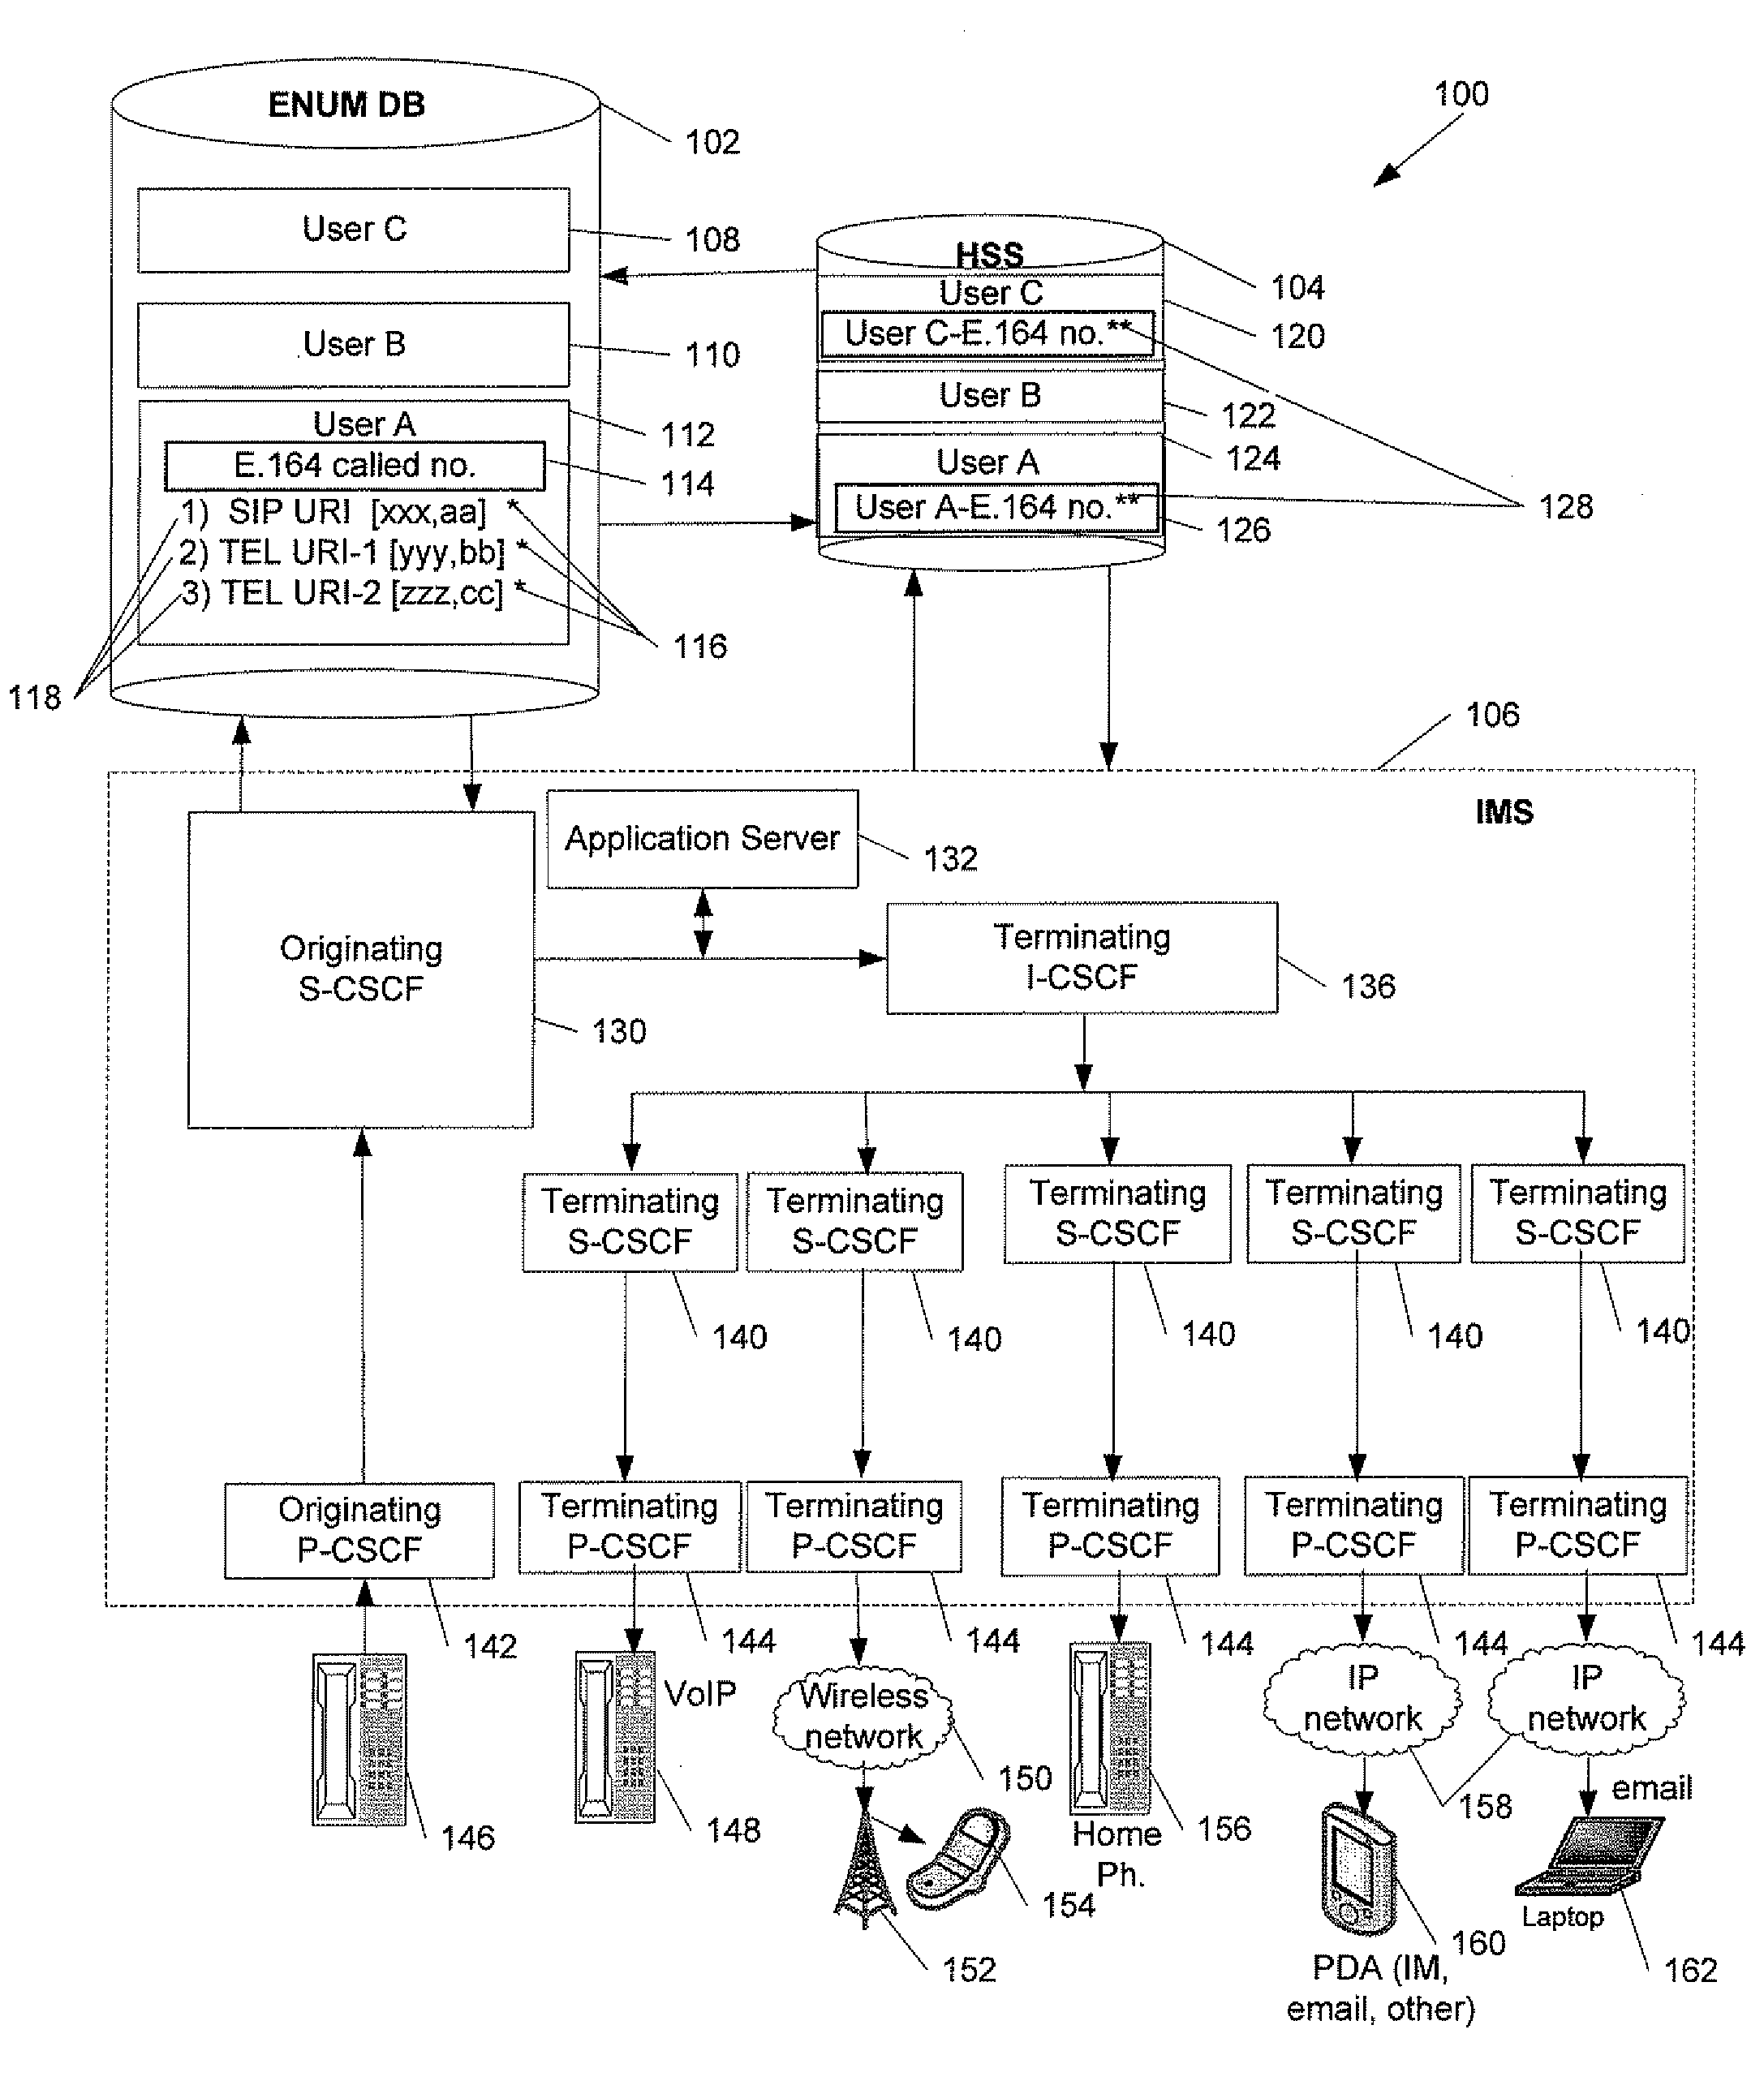 Method and System to Provision Emergency Contact Services in a Communication Network